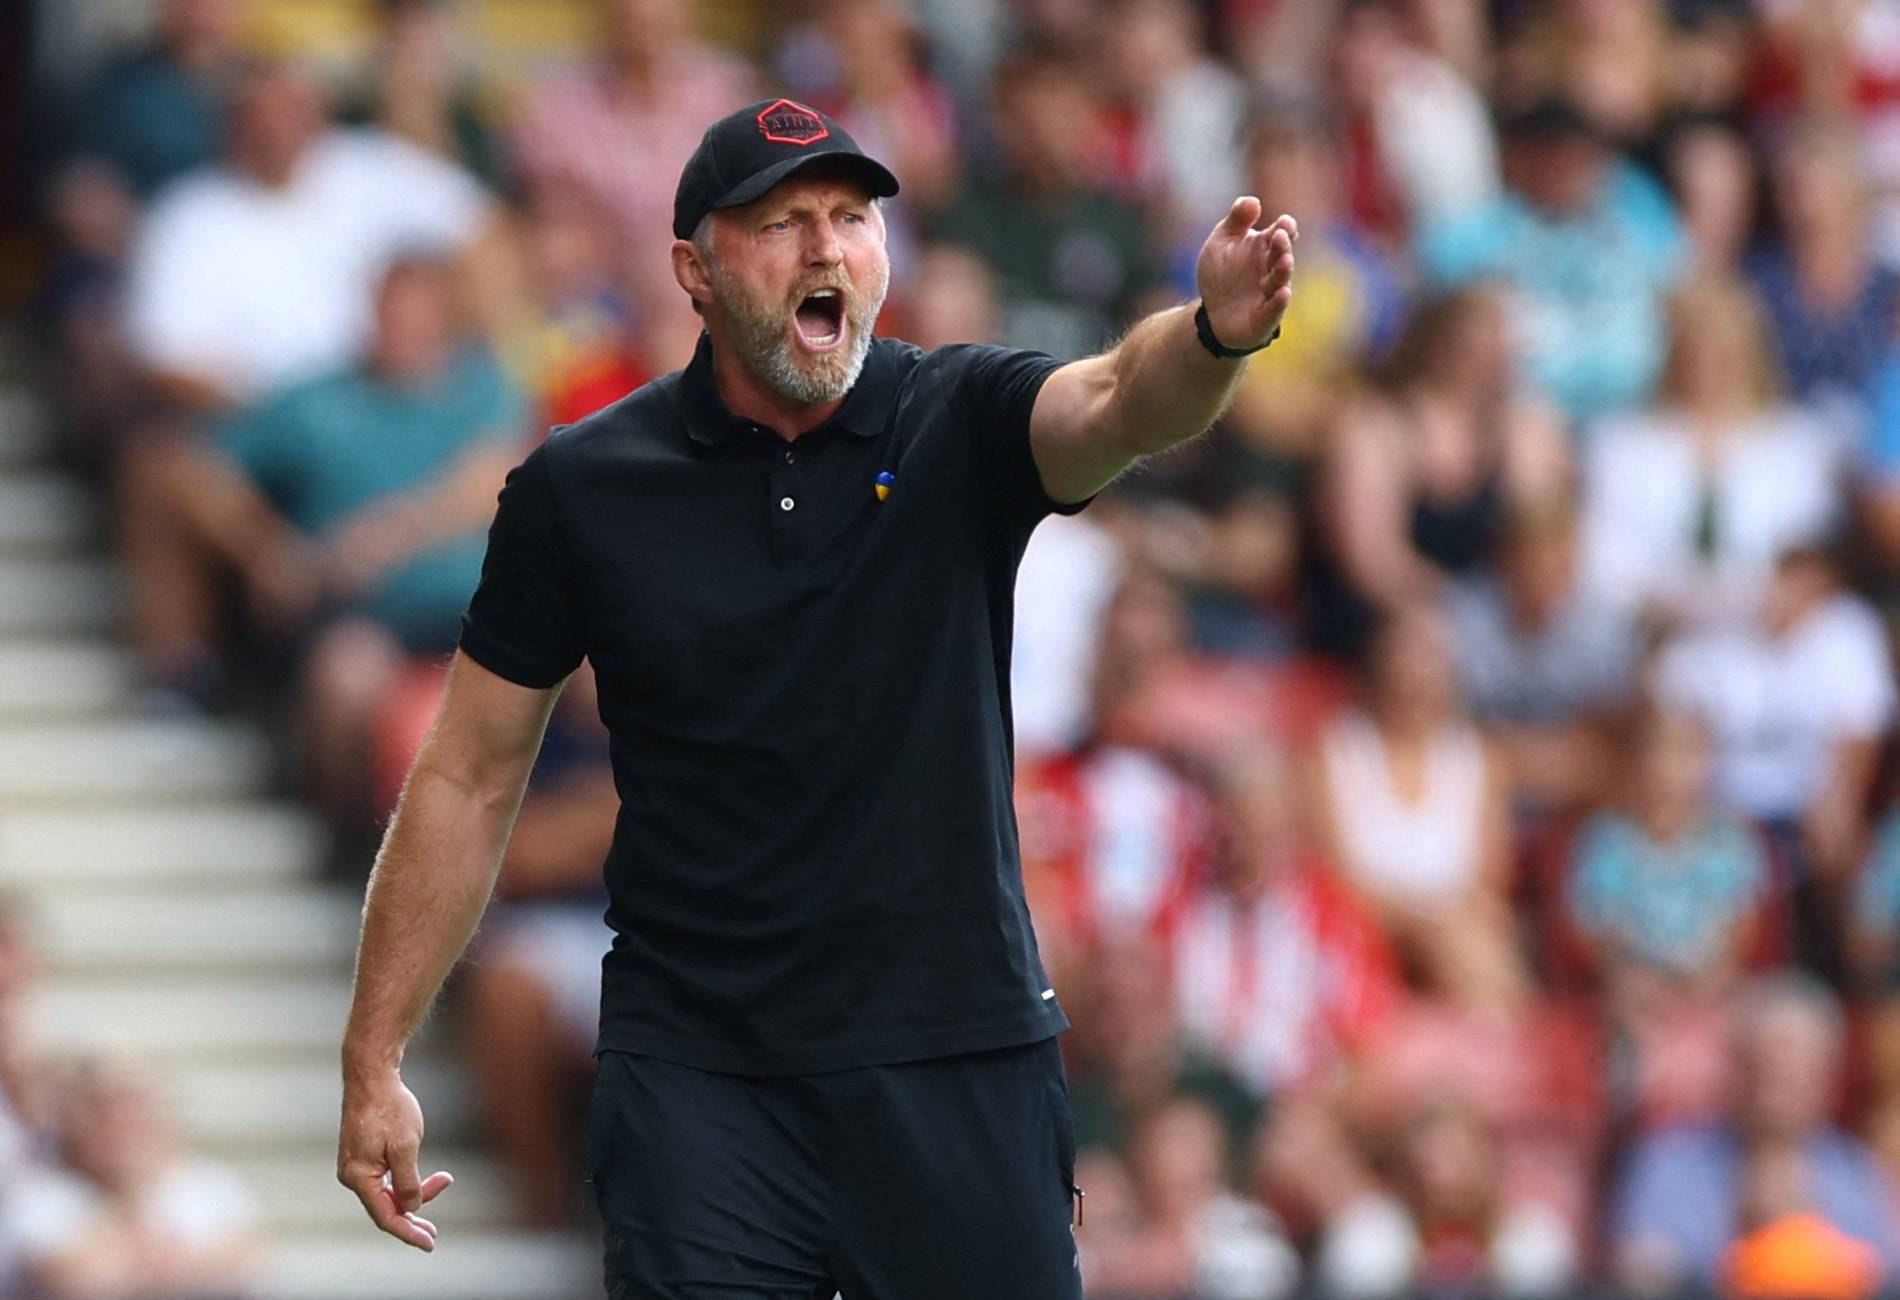 Southampton manager Ralph Hasenhuttl shouting during Premier League game